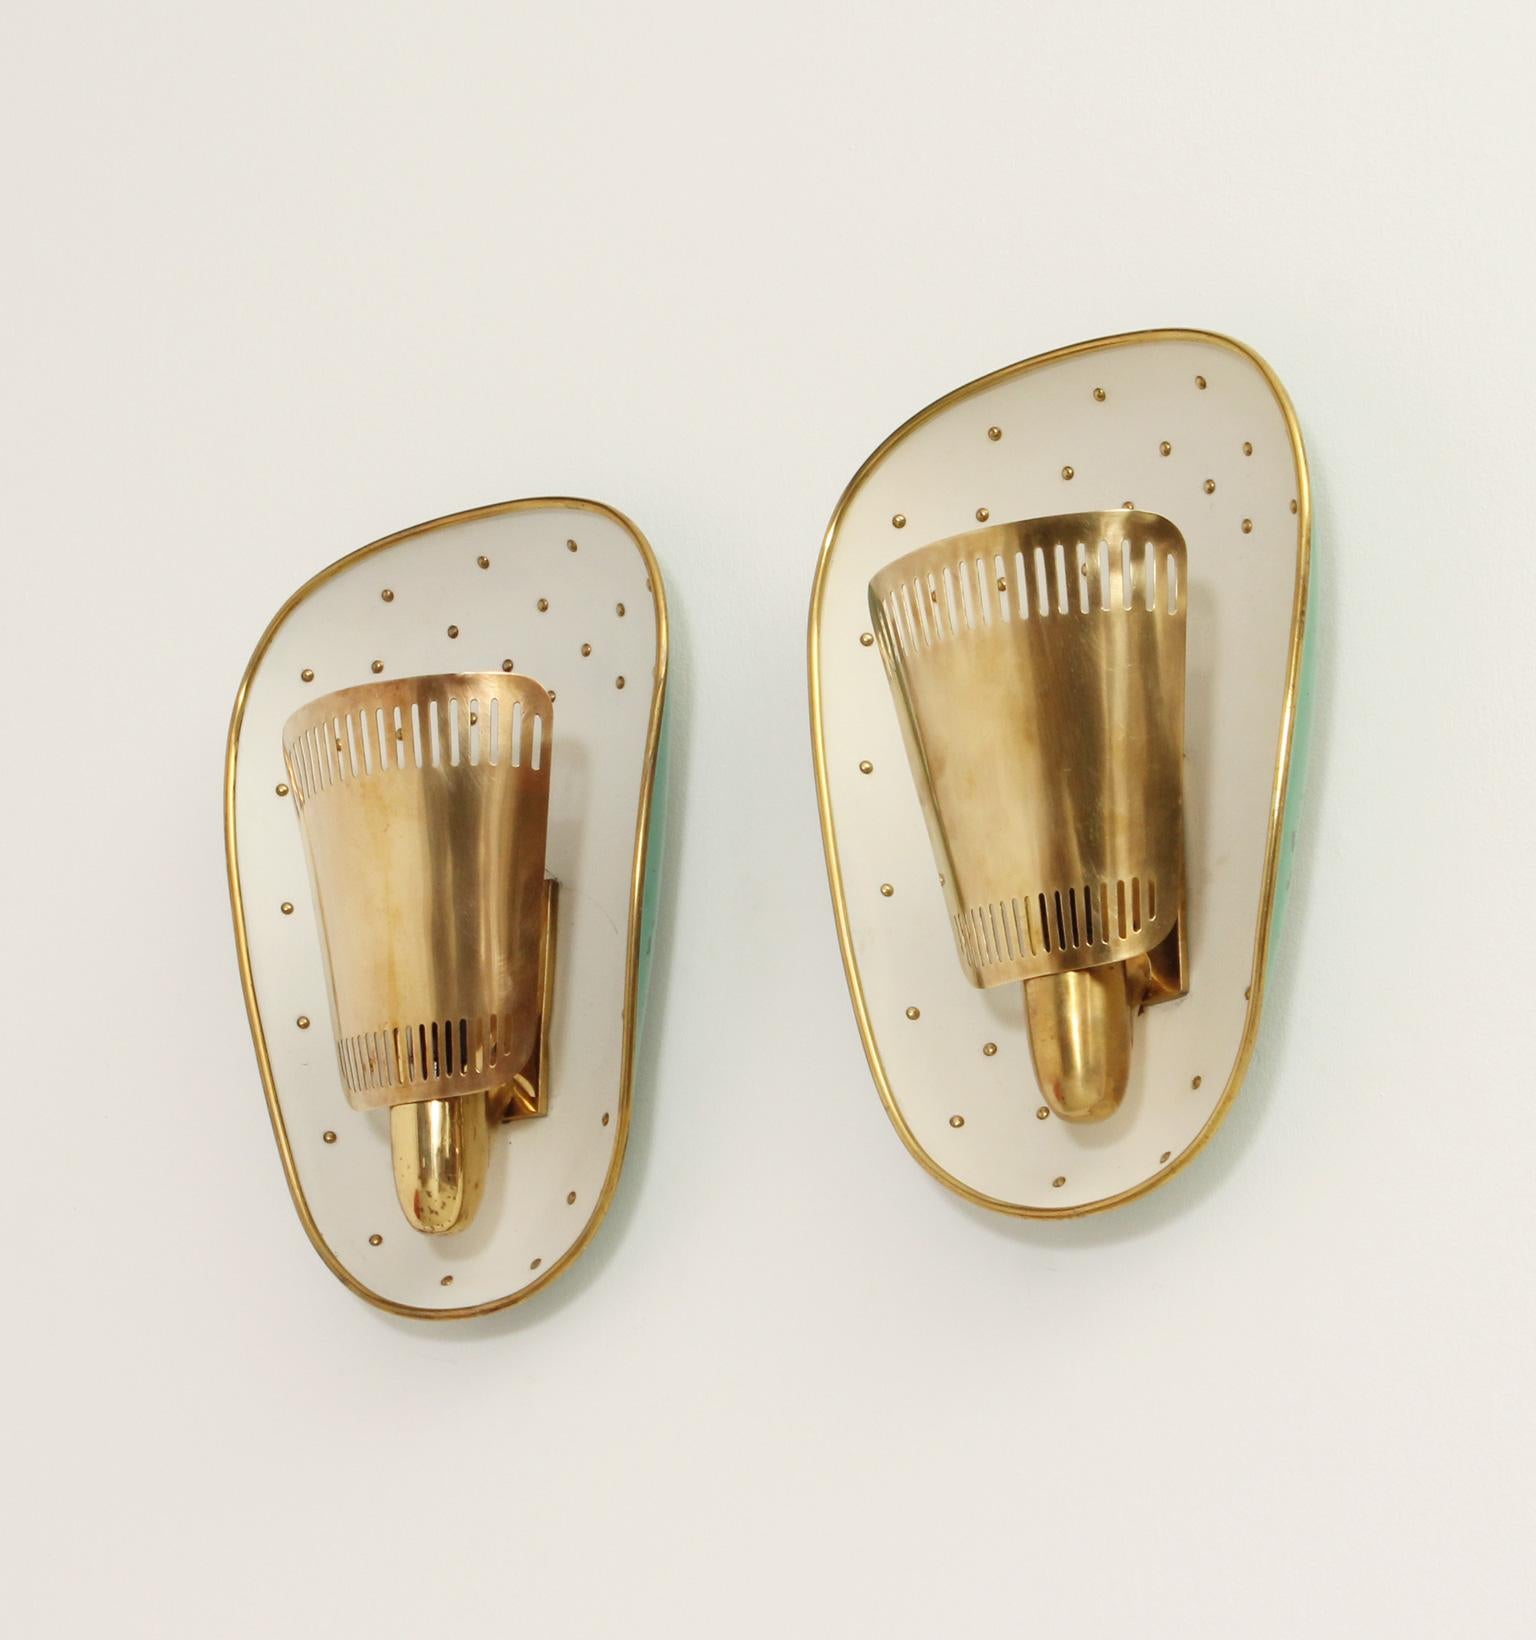 Mid-20th Century Large Midcentury Sconces Attributed to Hillebrand, Germany, 1950s For Sale